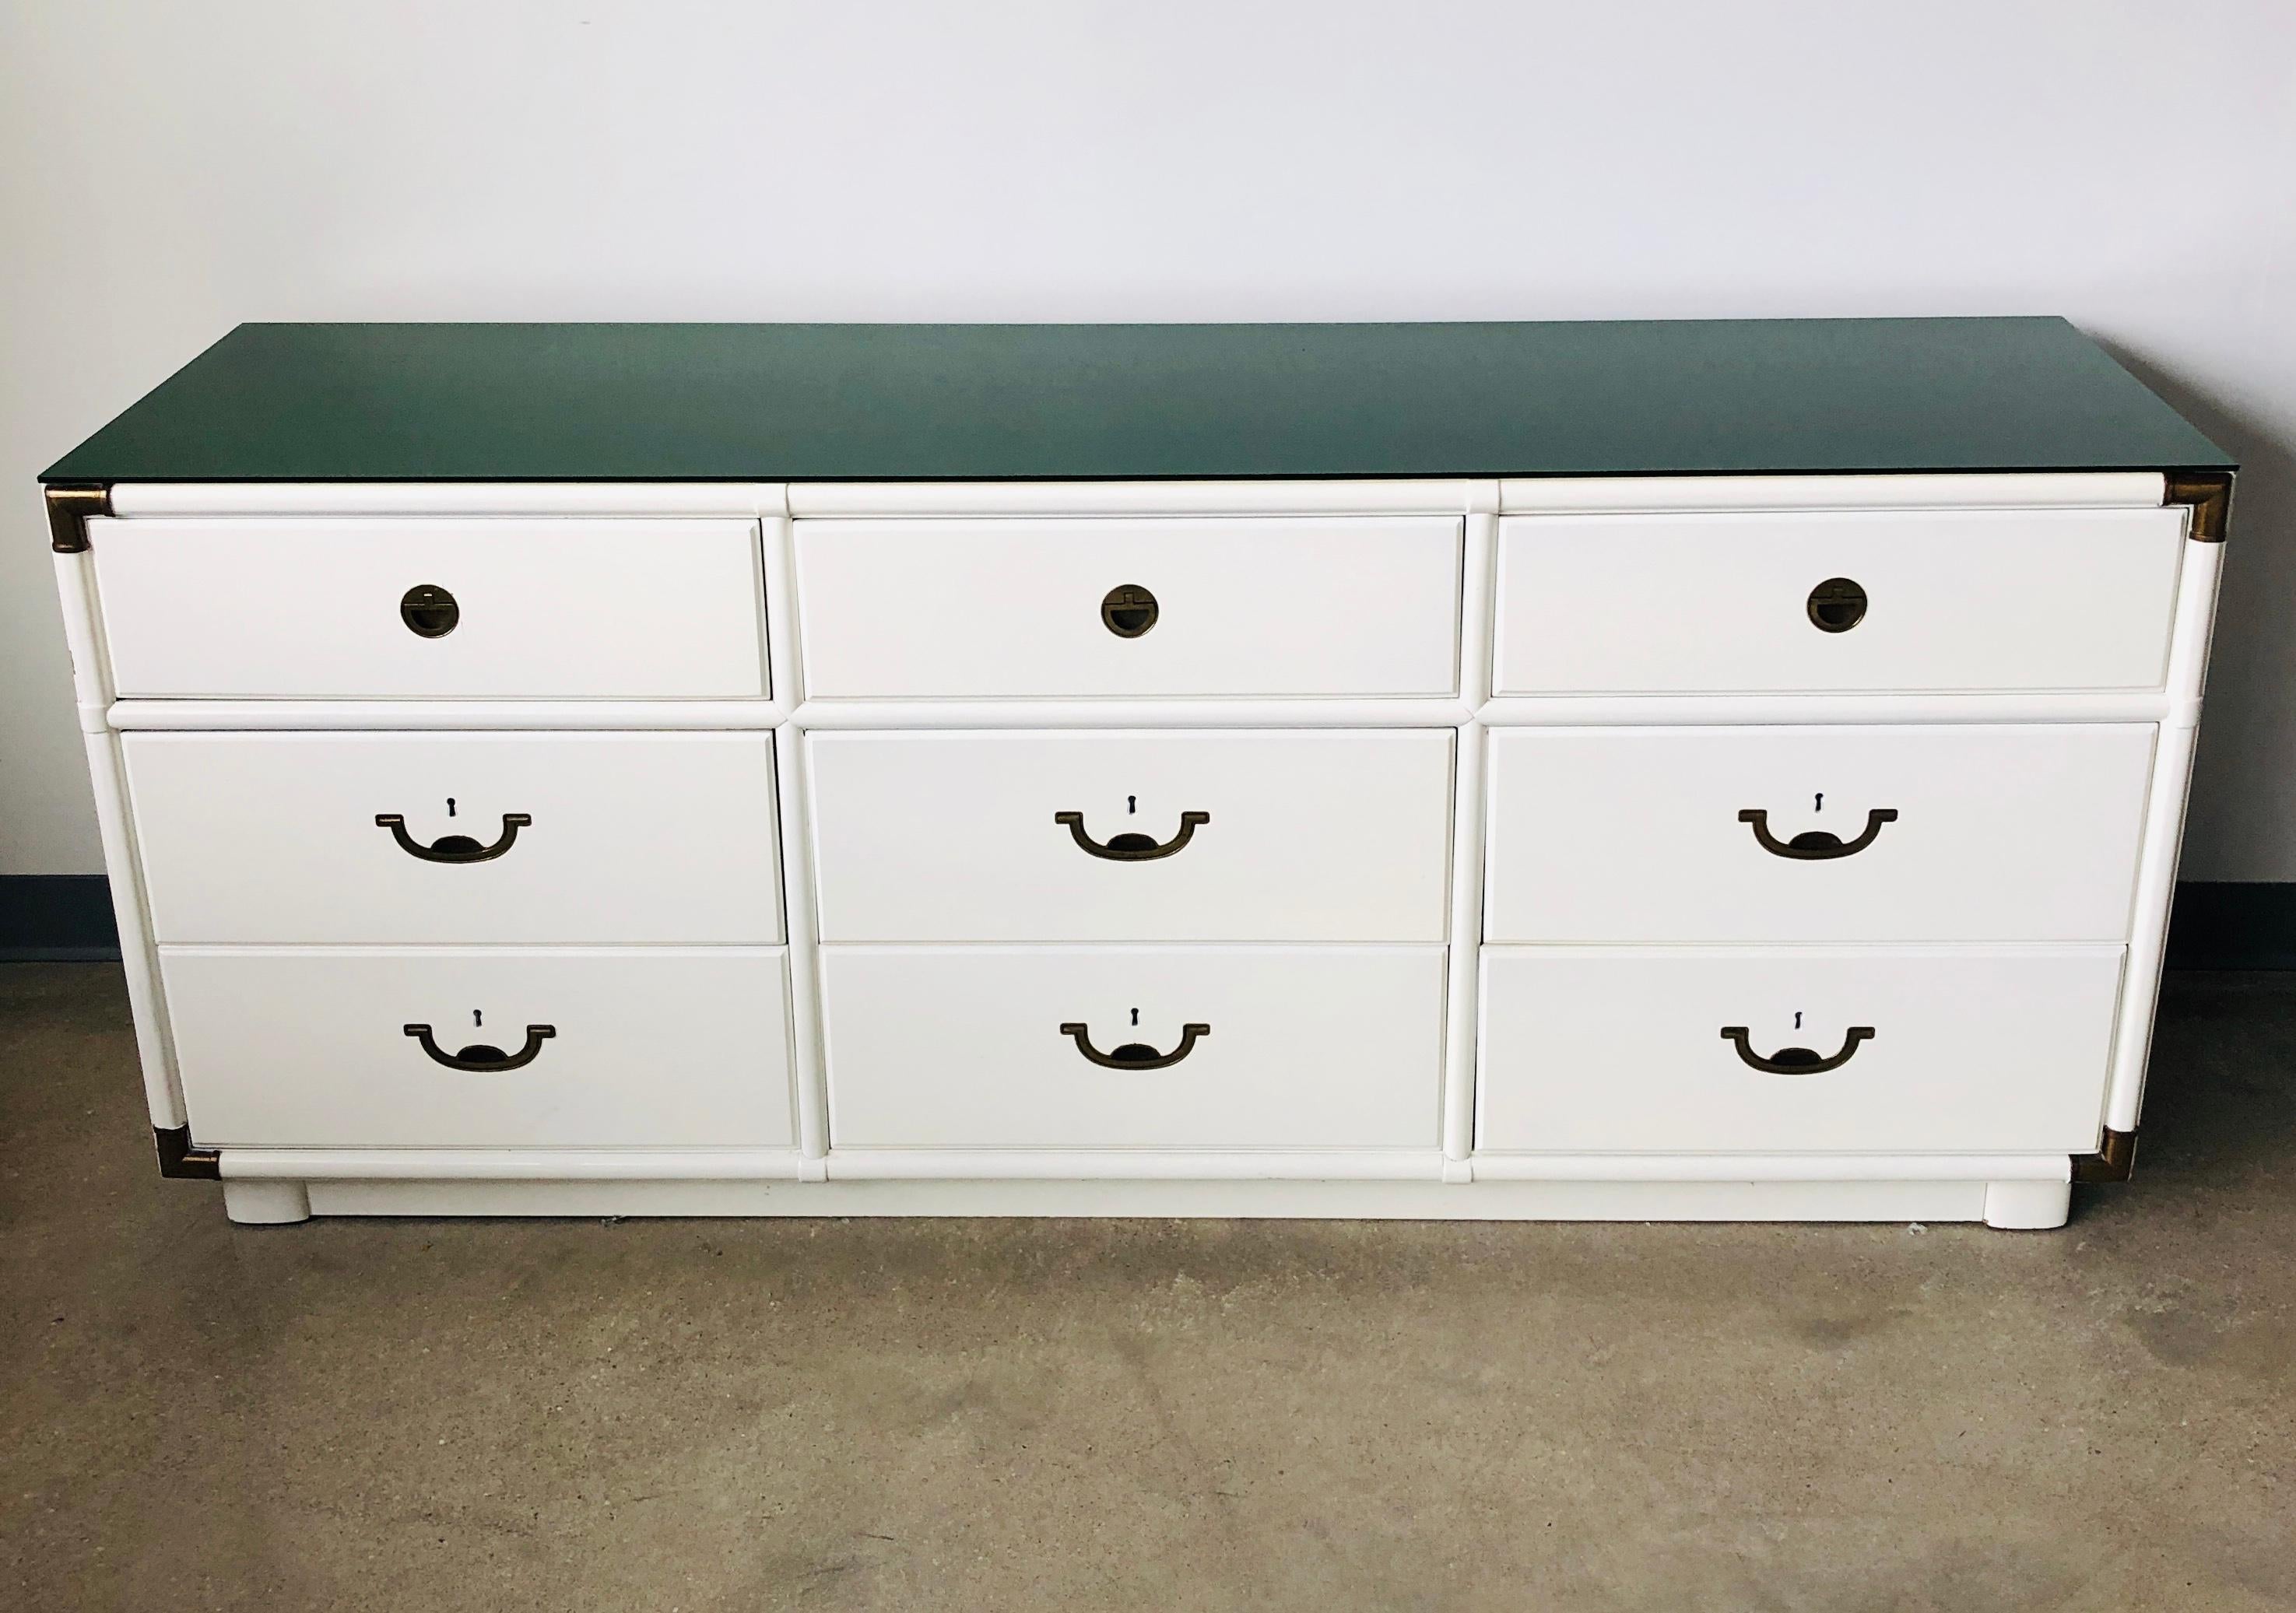 Offered is a Mid-Century Modern signed Drexel lacquered in white campaign dresser with brass hardware and a removable emerald green Lucite top. We love vintage 1970s campaign furniture! This fabulous dresser is lacquered in bright white with